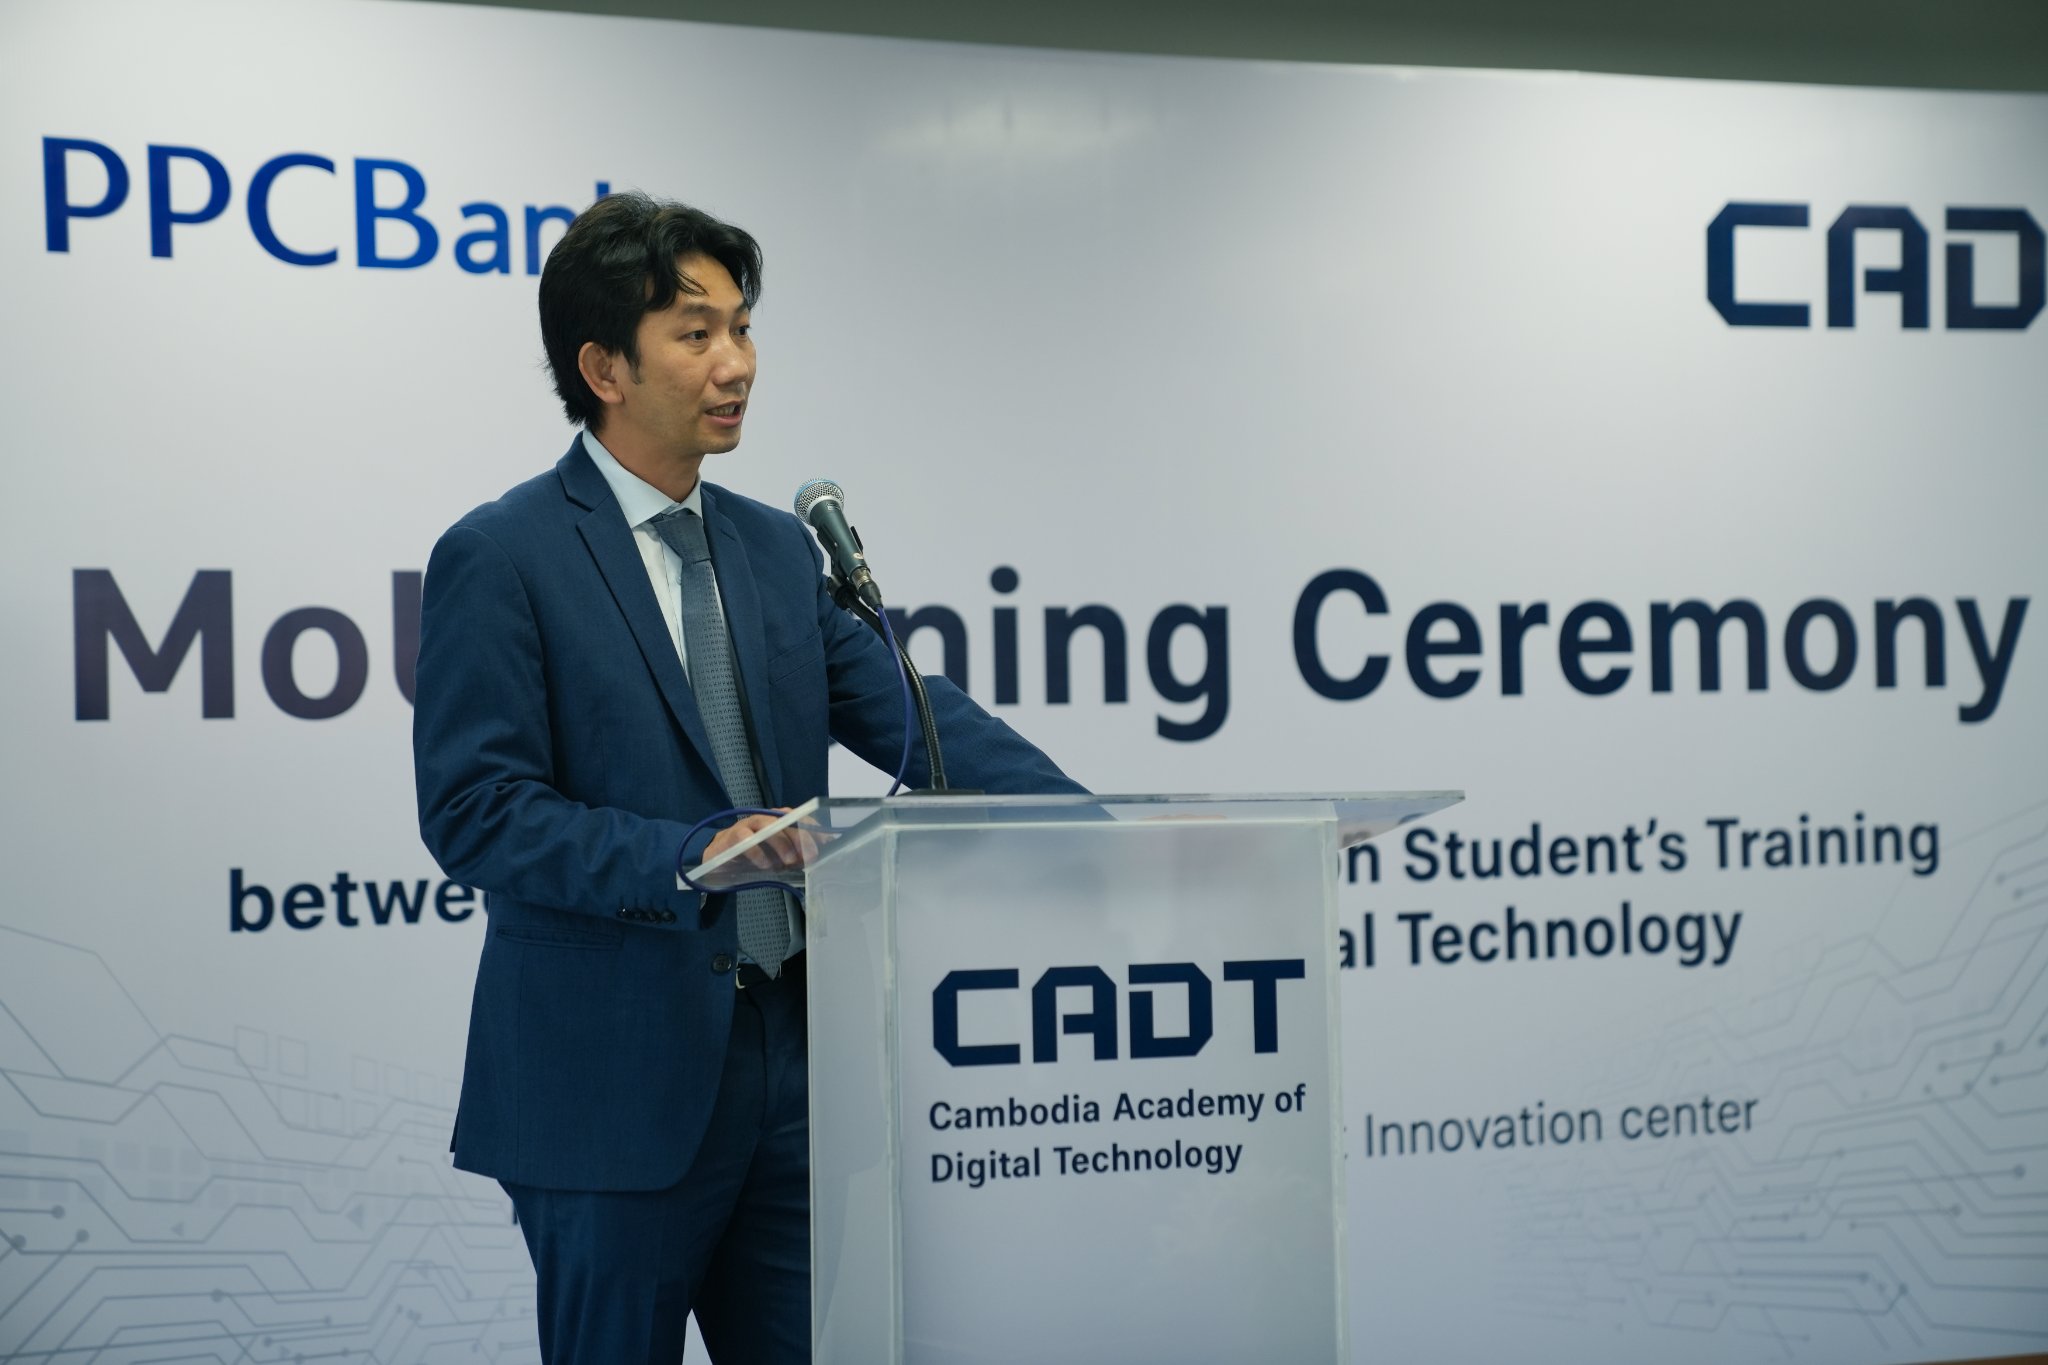 CADT AND PPCBank TO SIGNED A CORPORATION ON DIGITAL EDUCATION AND INTERNSHIP PROGRAM